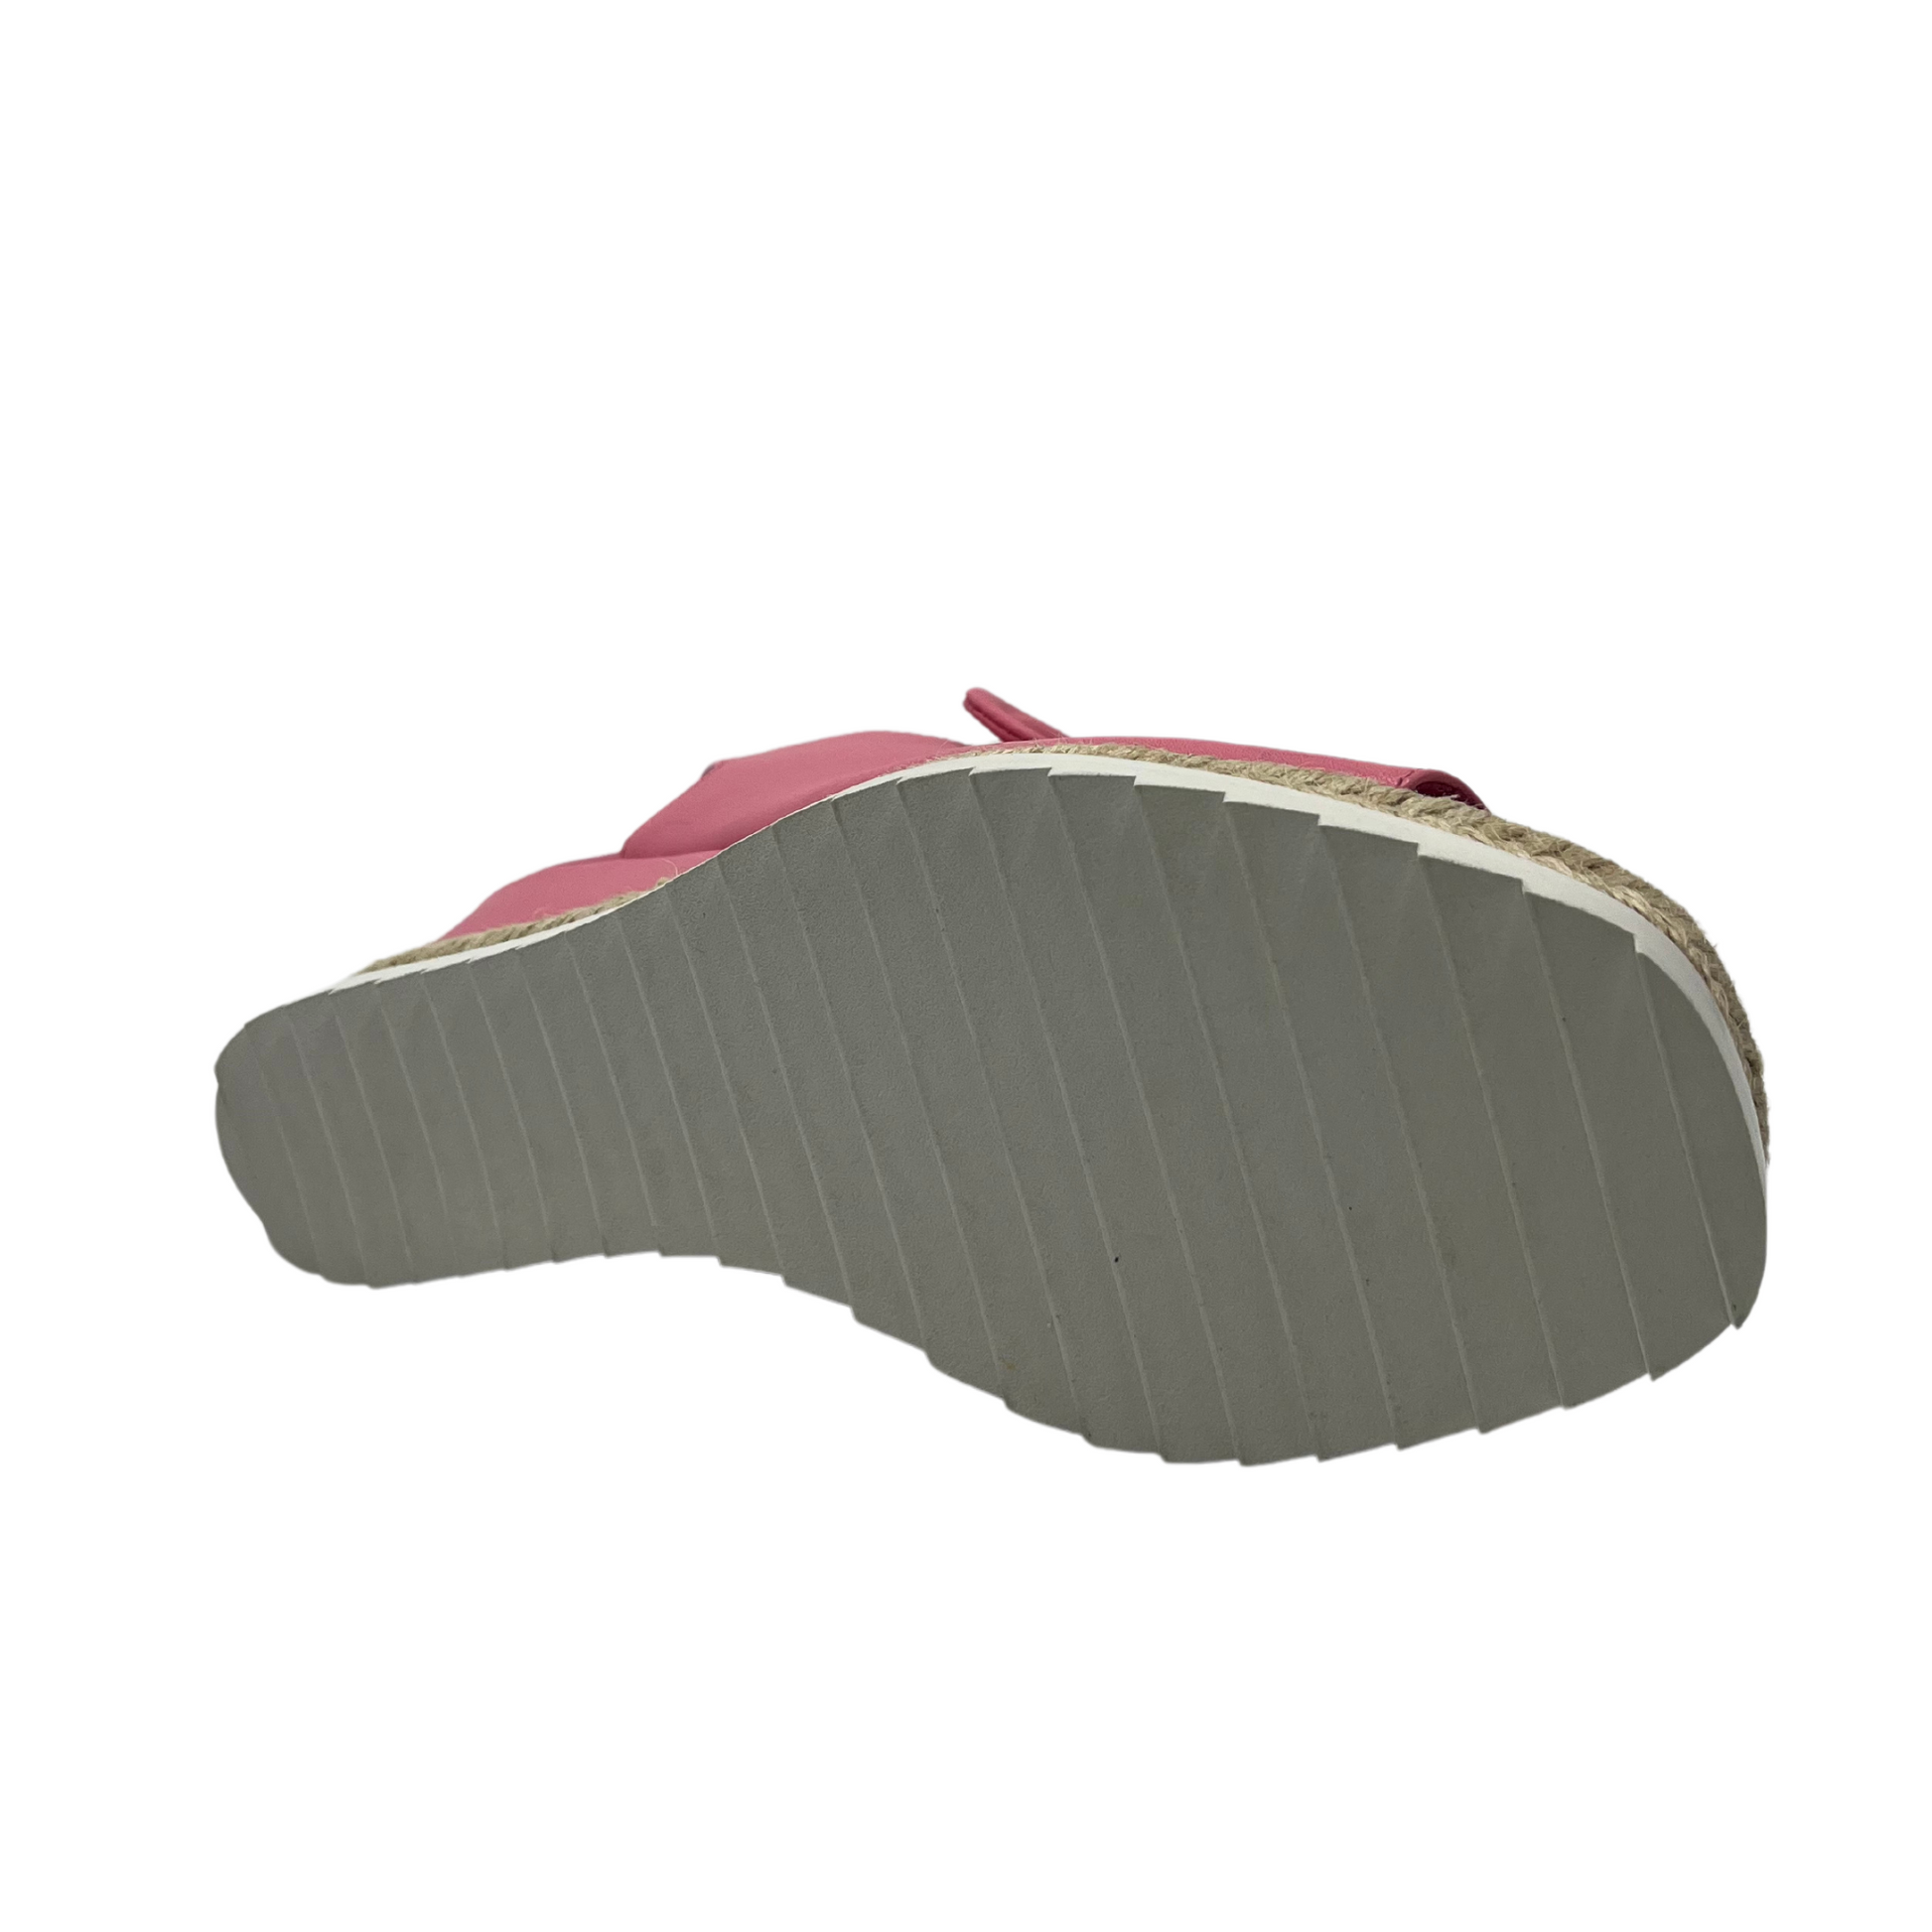 Bottom view of pink leather wedge sandal with slingback strap and bow detail